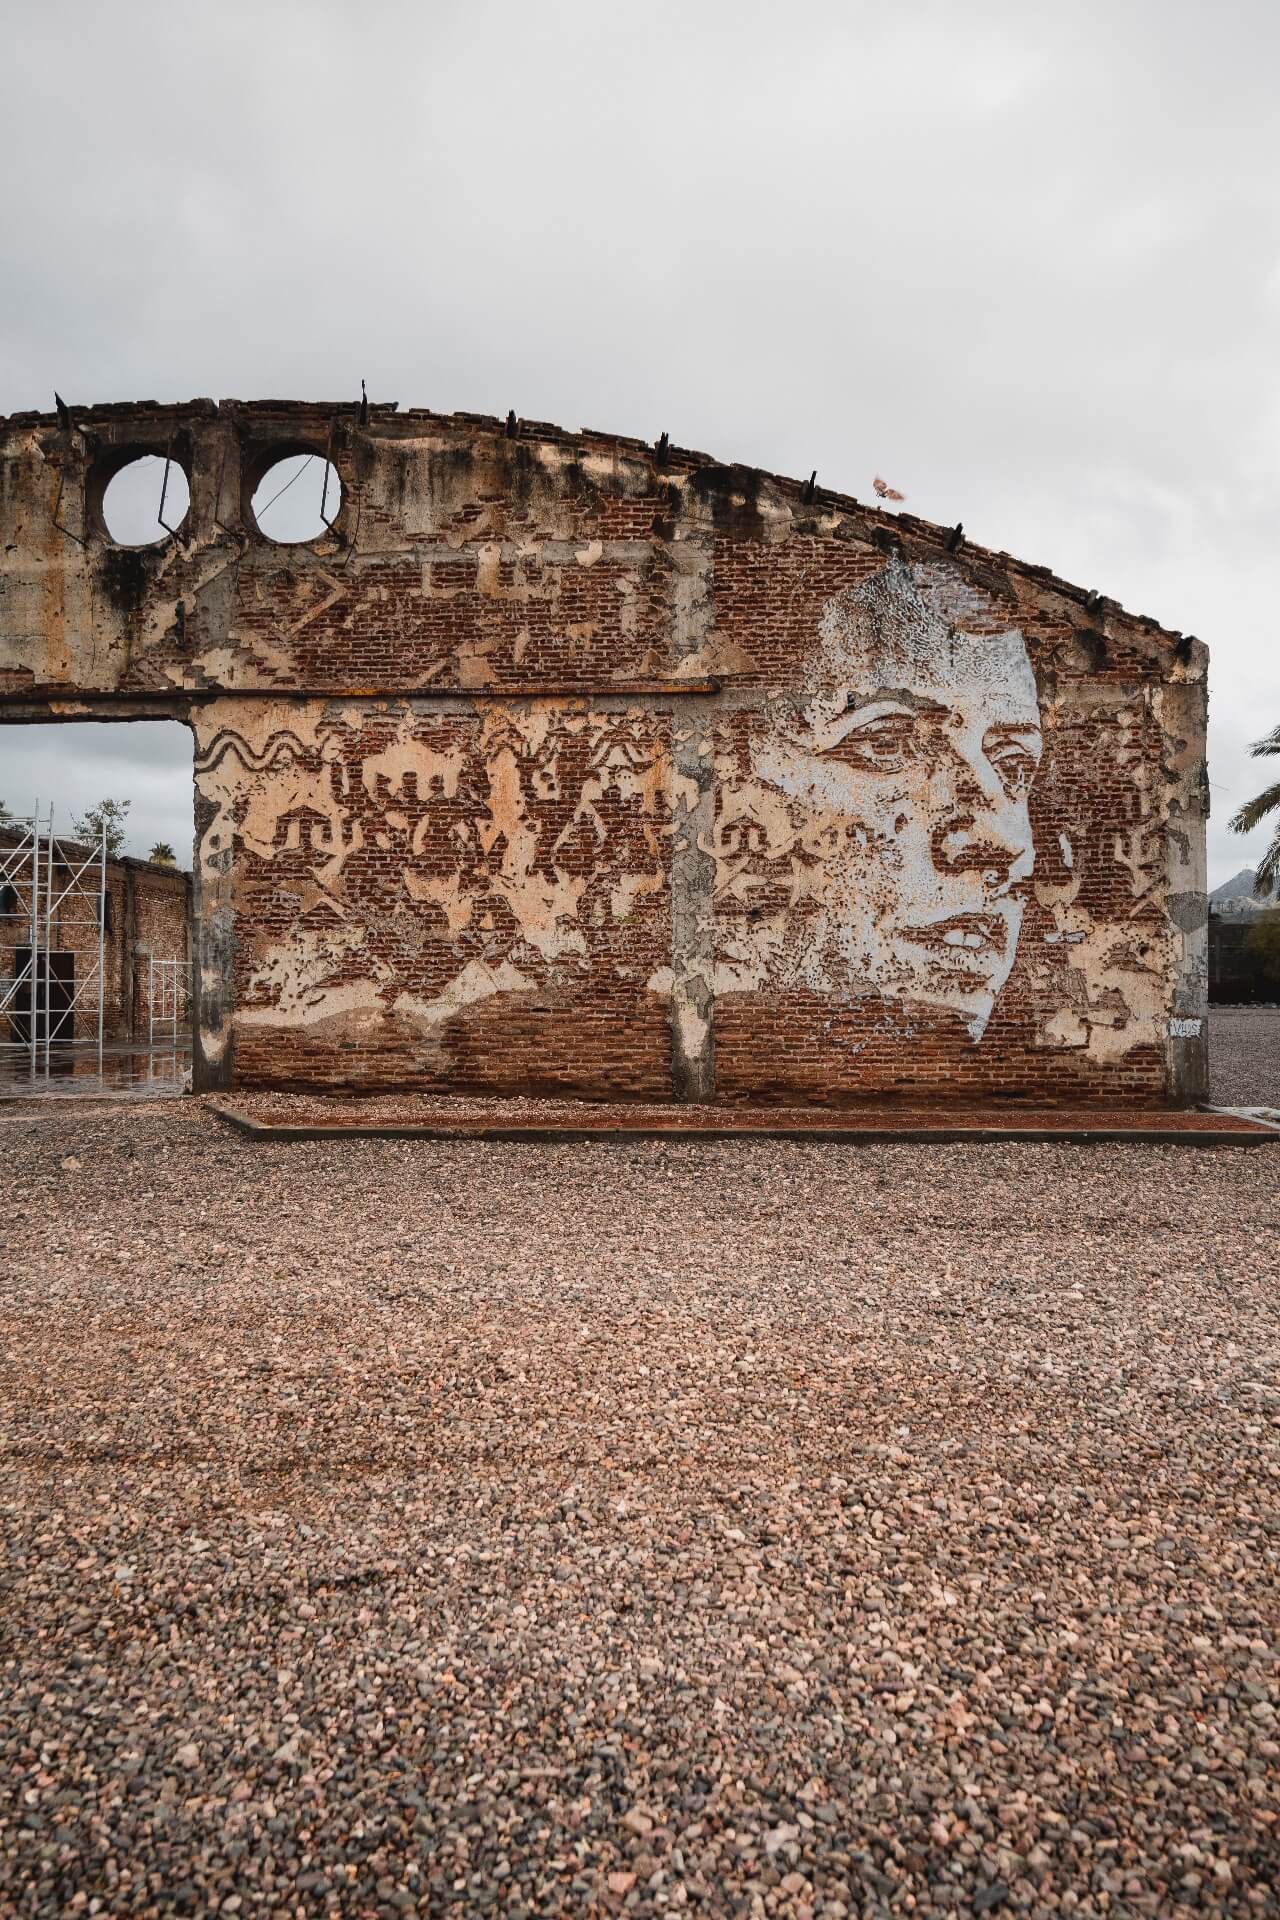 New mural by Vhils in Sonora